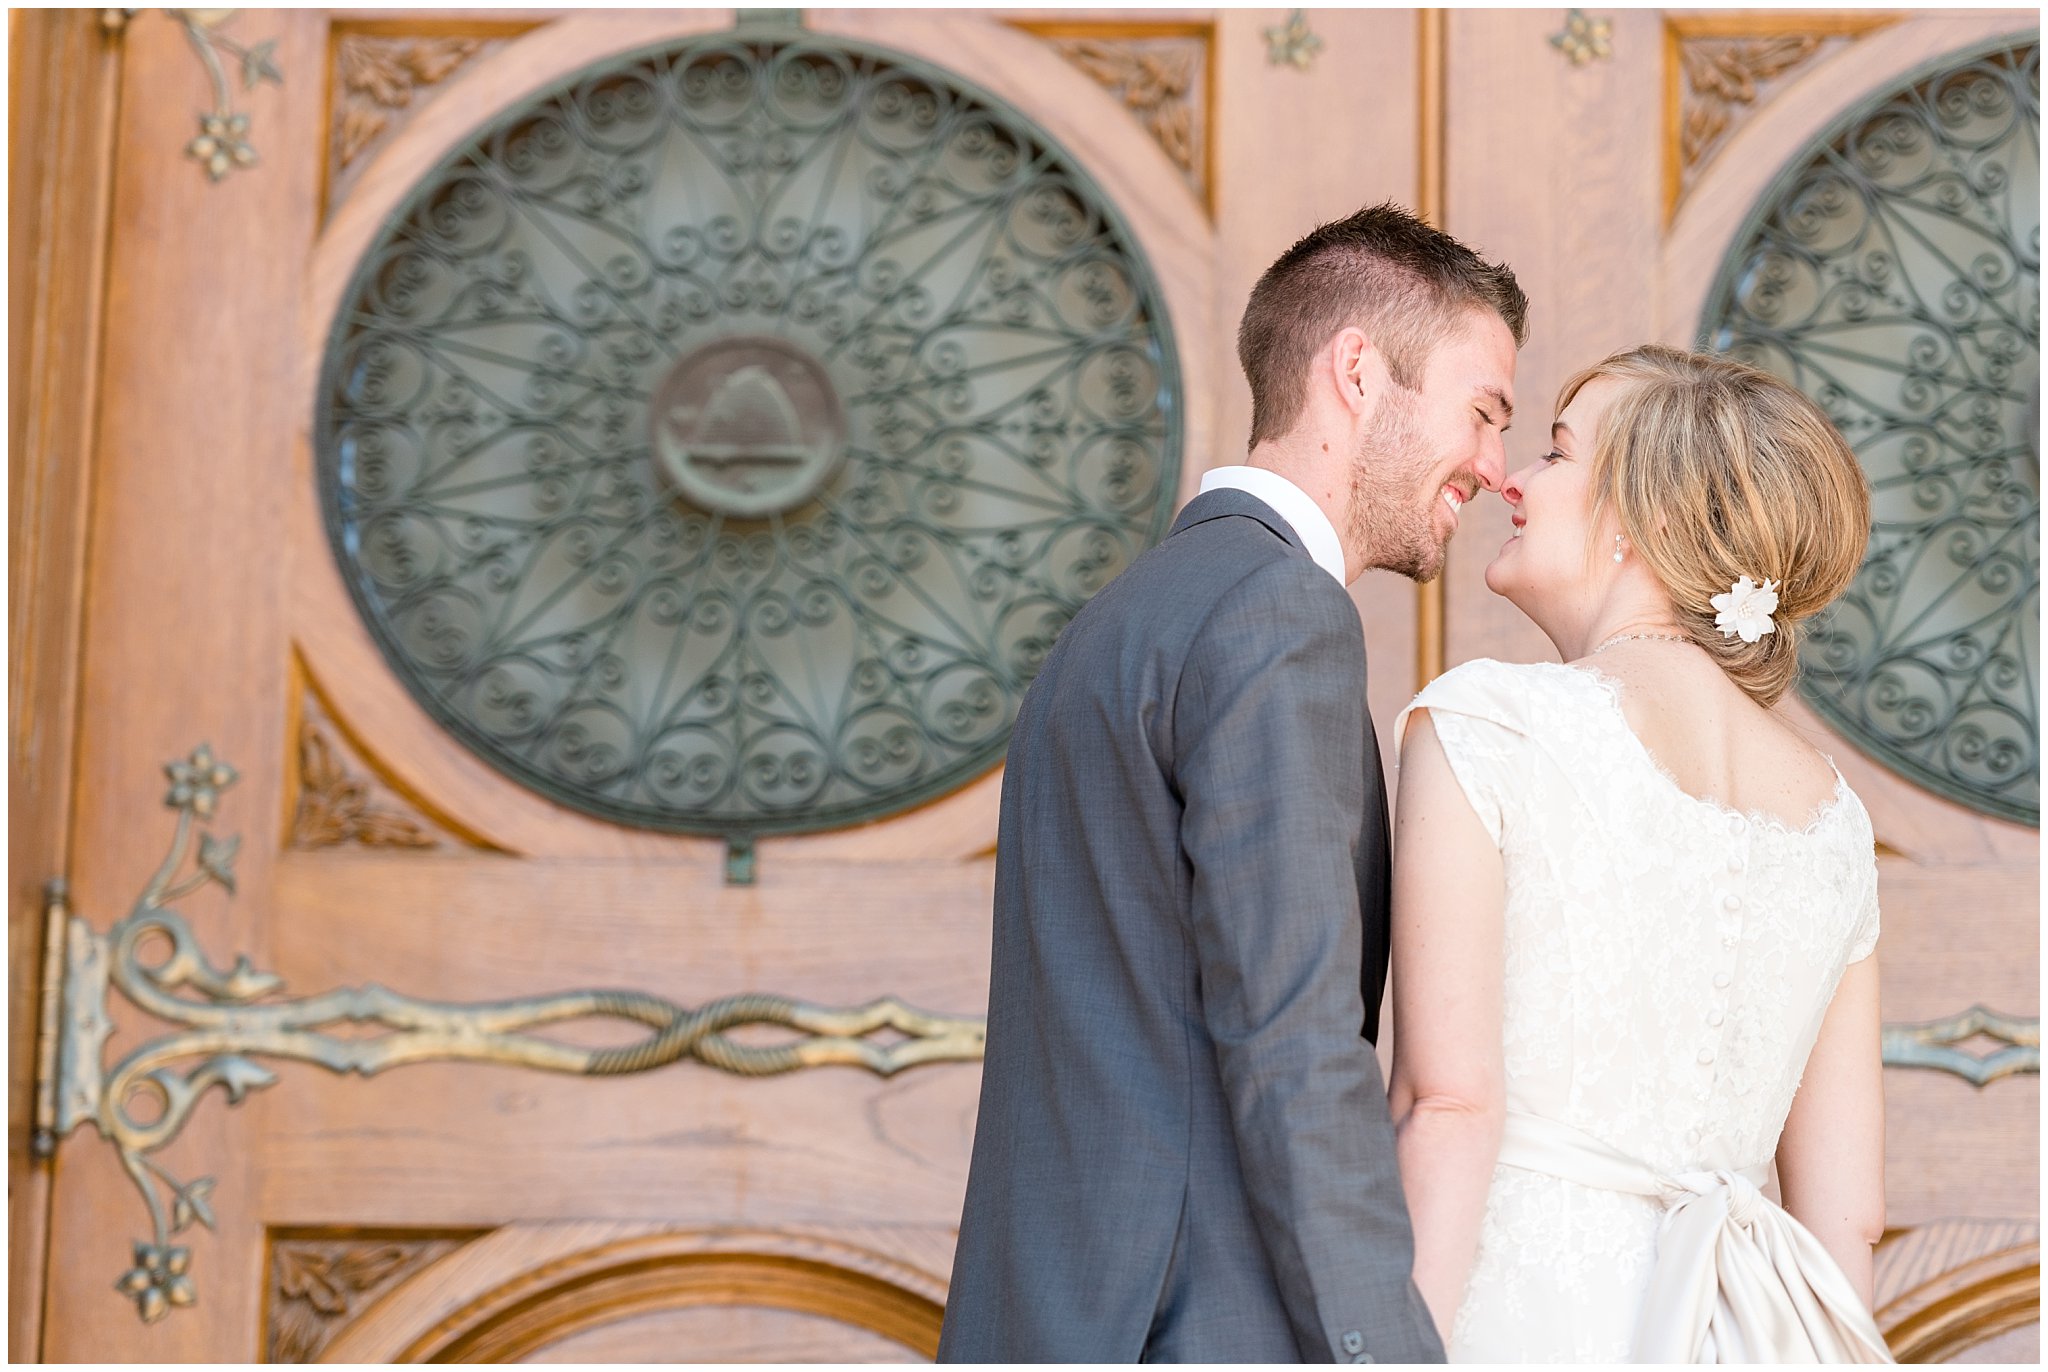 Salt Lake Temple spring wedding | Coral and grey wedding | Bride and groom pictures on the stairs